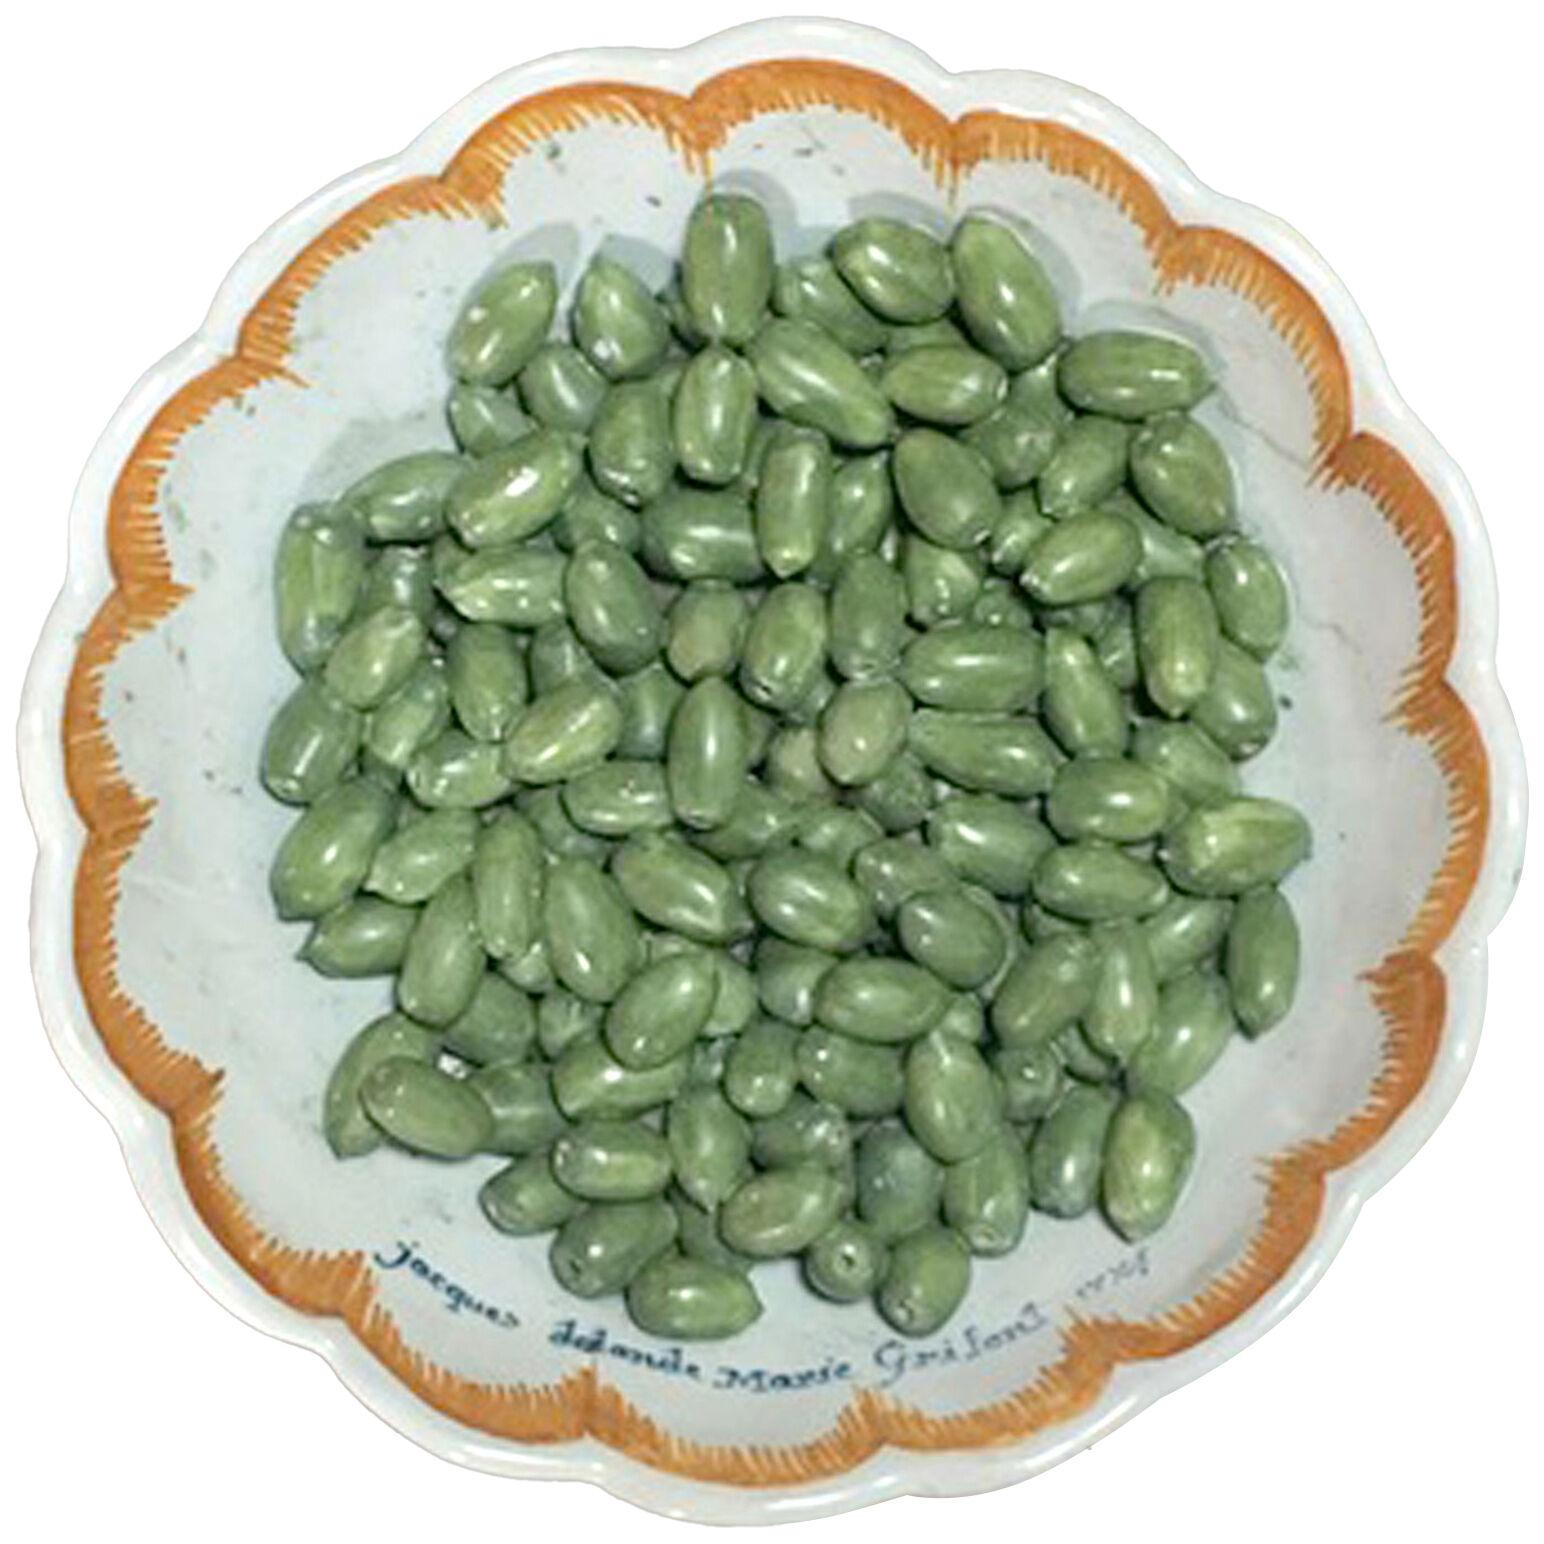 French Faience Trompe L'oeil Bowl with Olives, Nevers, Dated 1774